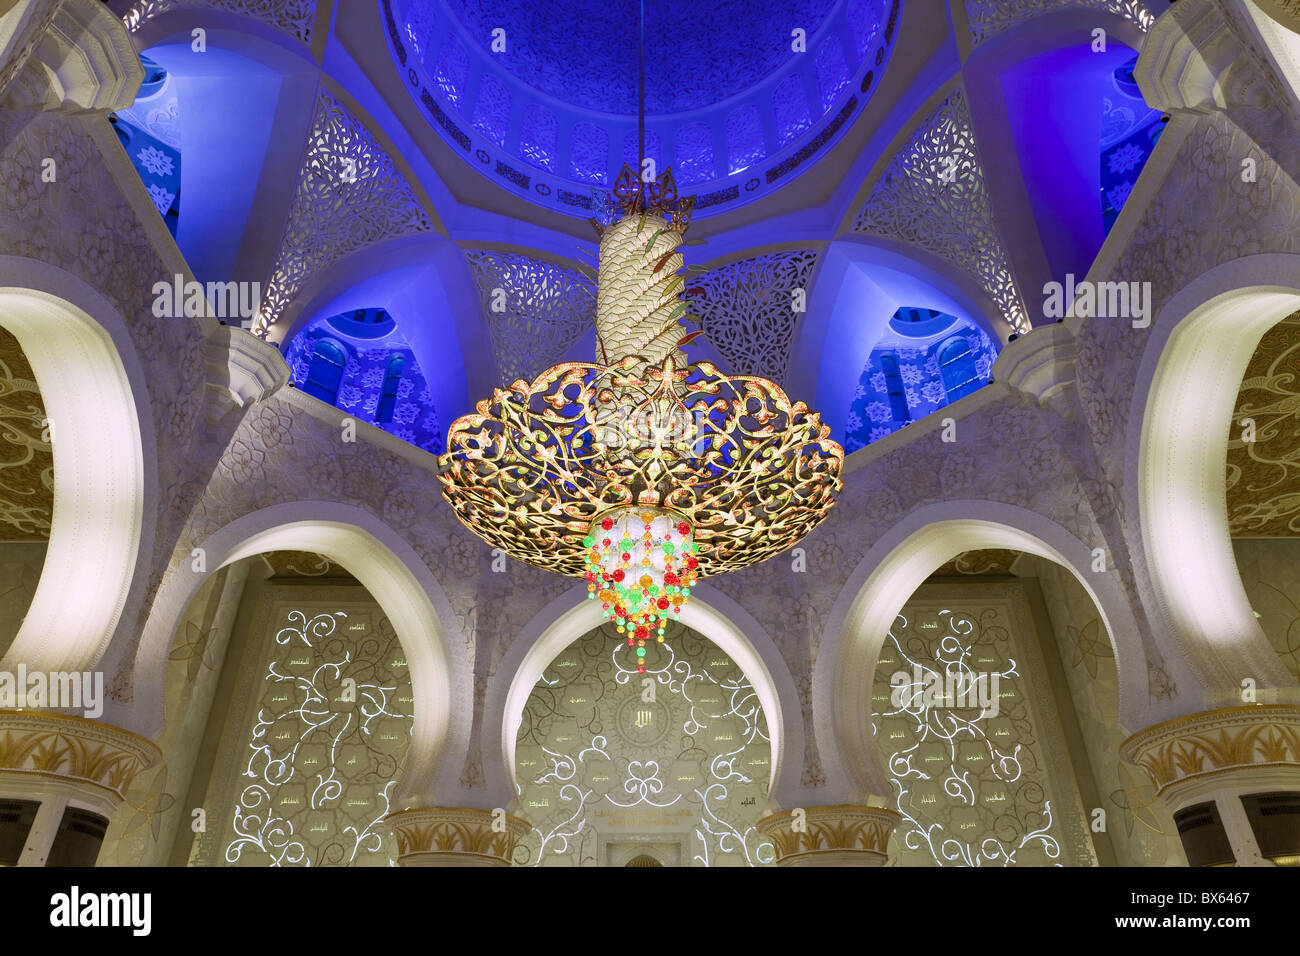 The largest ornate chandelier in the world, prayer hall of Sheikh Zayed Bin Sultan Al Nahyan Mosque, Abu Dhabi, UAE Stock Photo